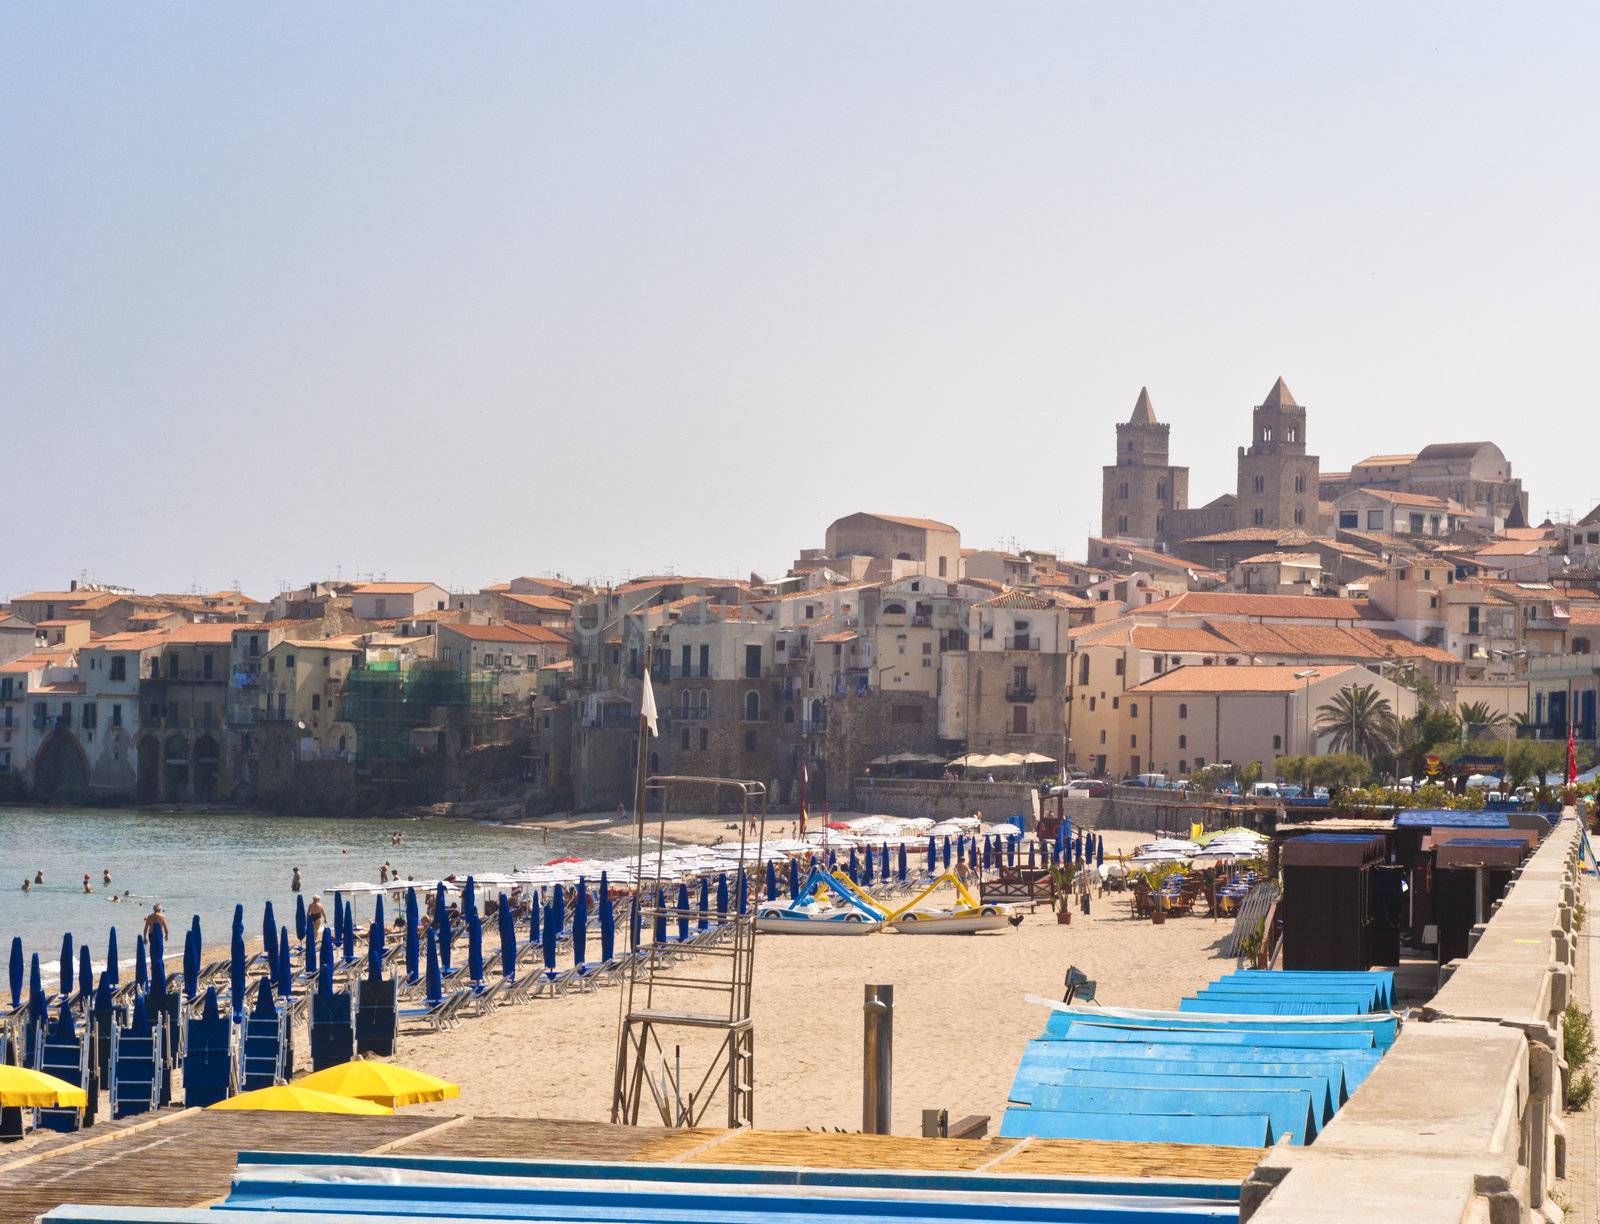 beach of Cefalu with centre city in the background. Sicily